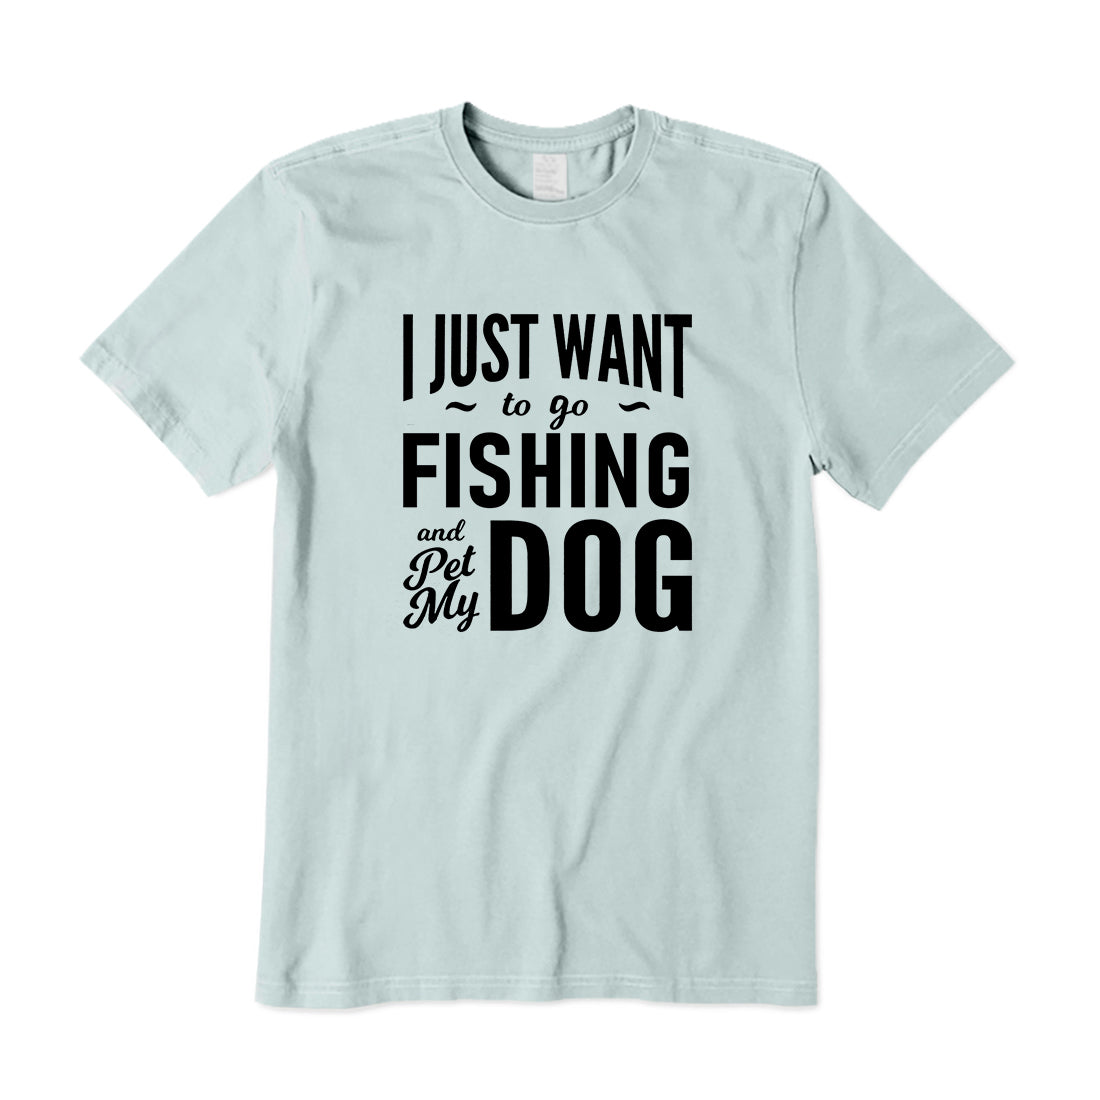 I Just Want to Go Fishing and Pet My Dog T-Shirt